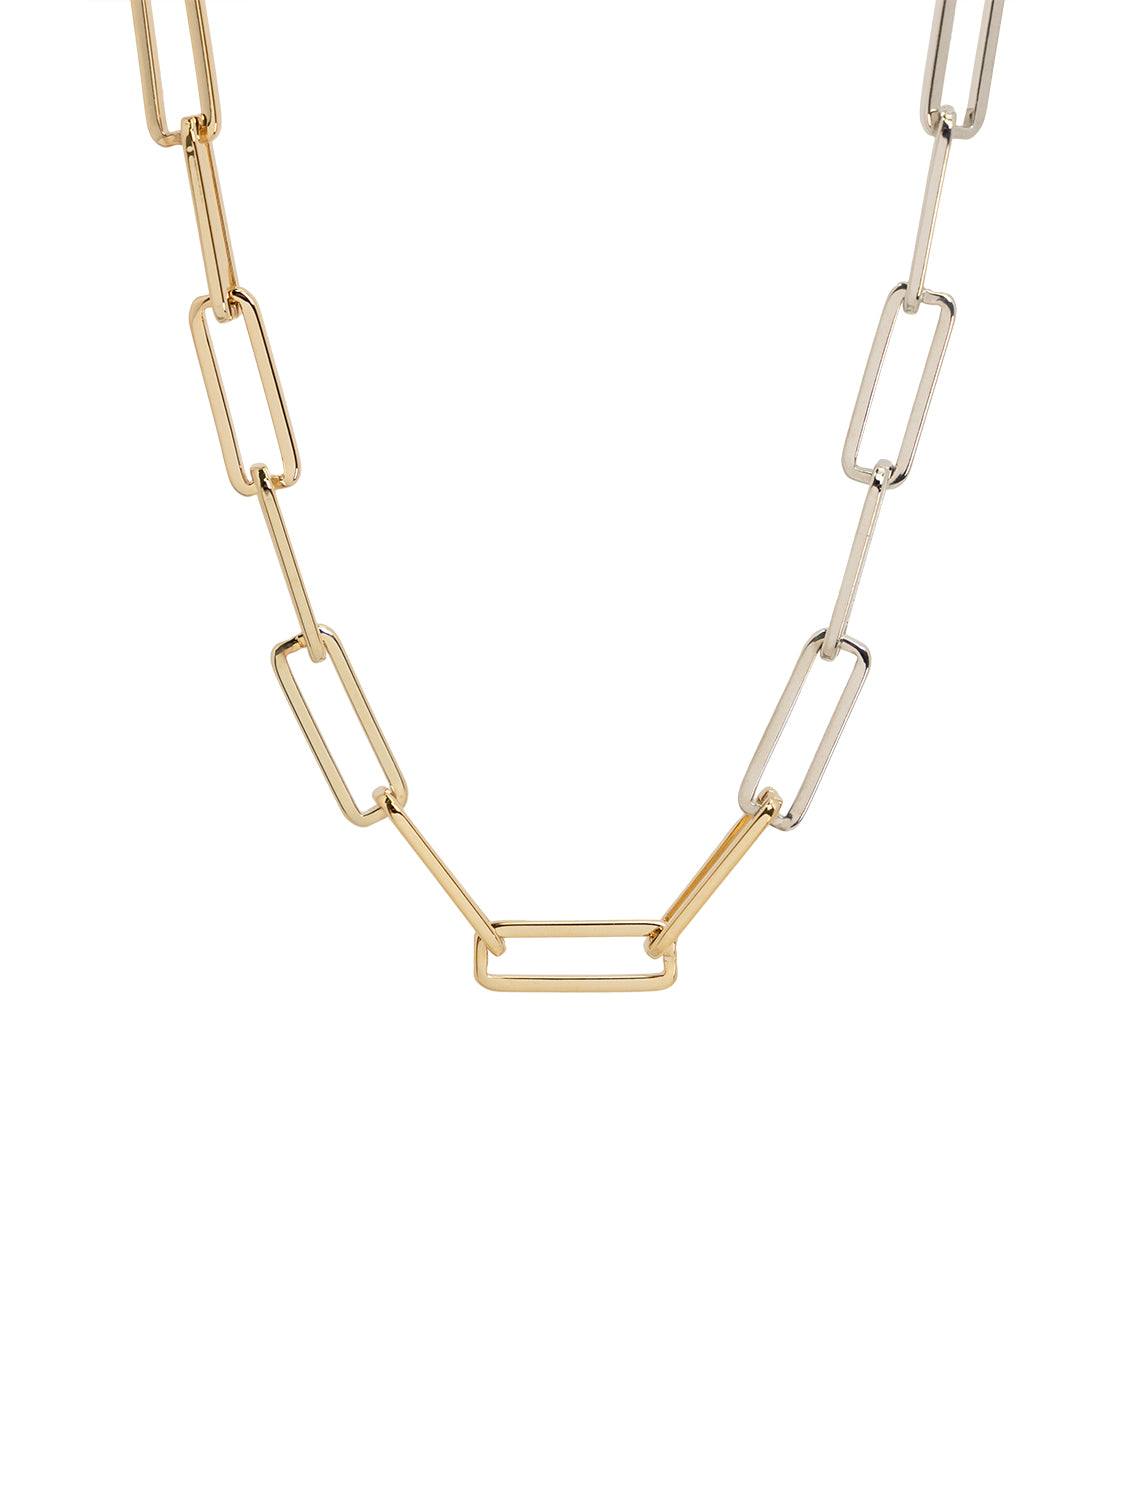 Bloomingdale's Diamond Paperclip Necklace in 14K White & Yellow Gold, 1.45  ct. t.w. - 100% Exclusive | Bloomingdale's